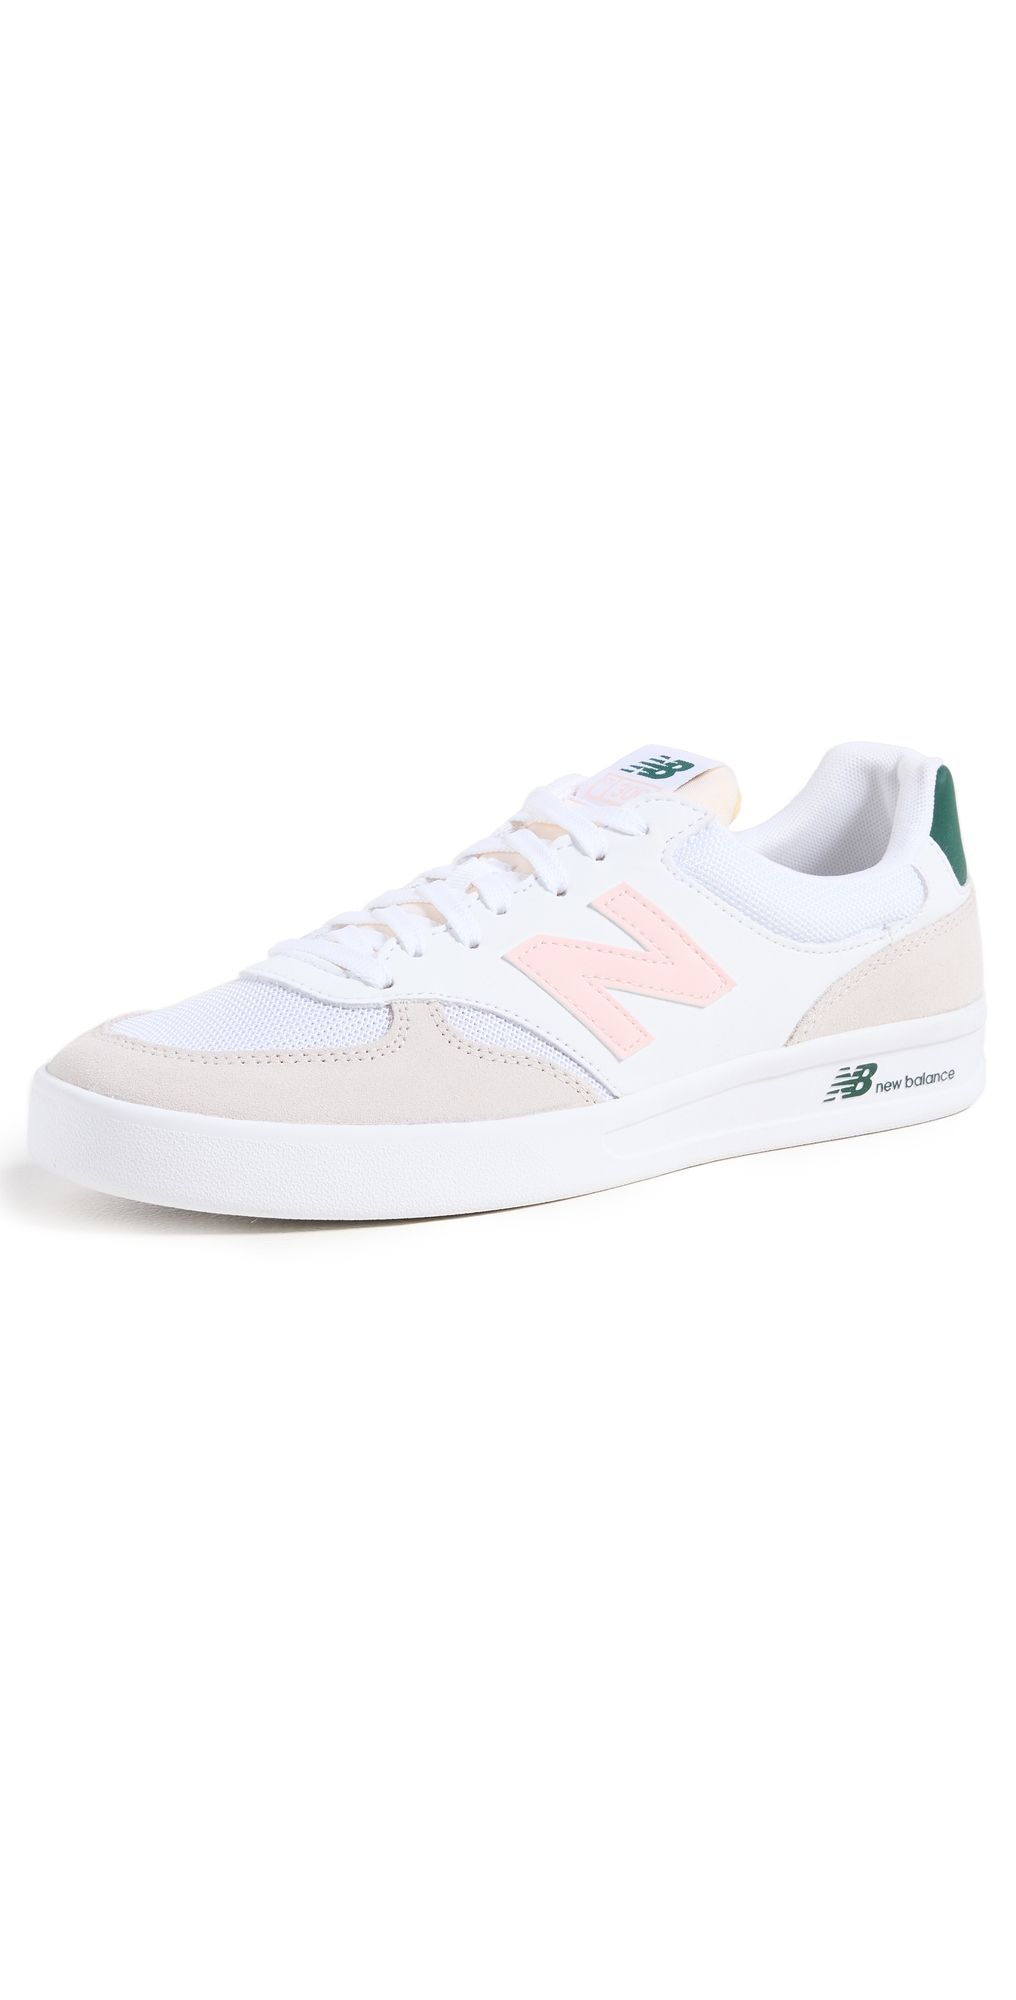 New Balance CT300V3 Sneakers | Shopbop